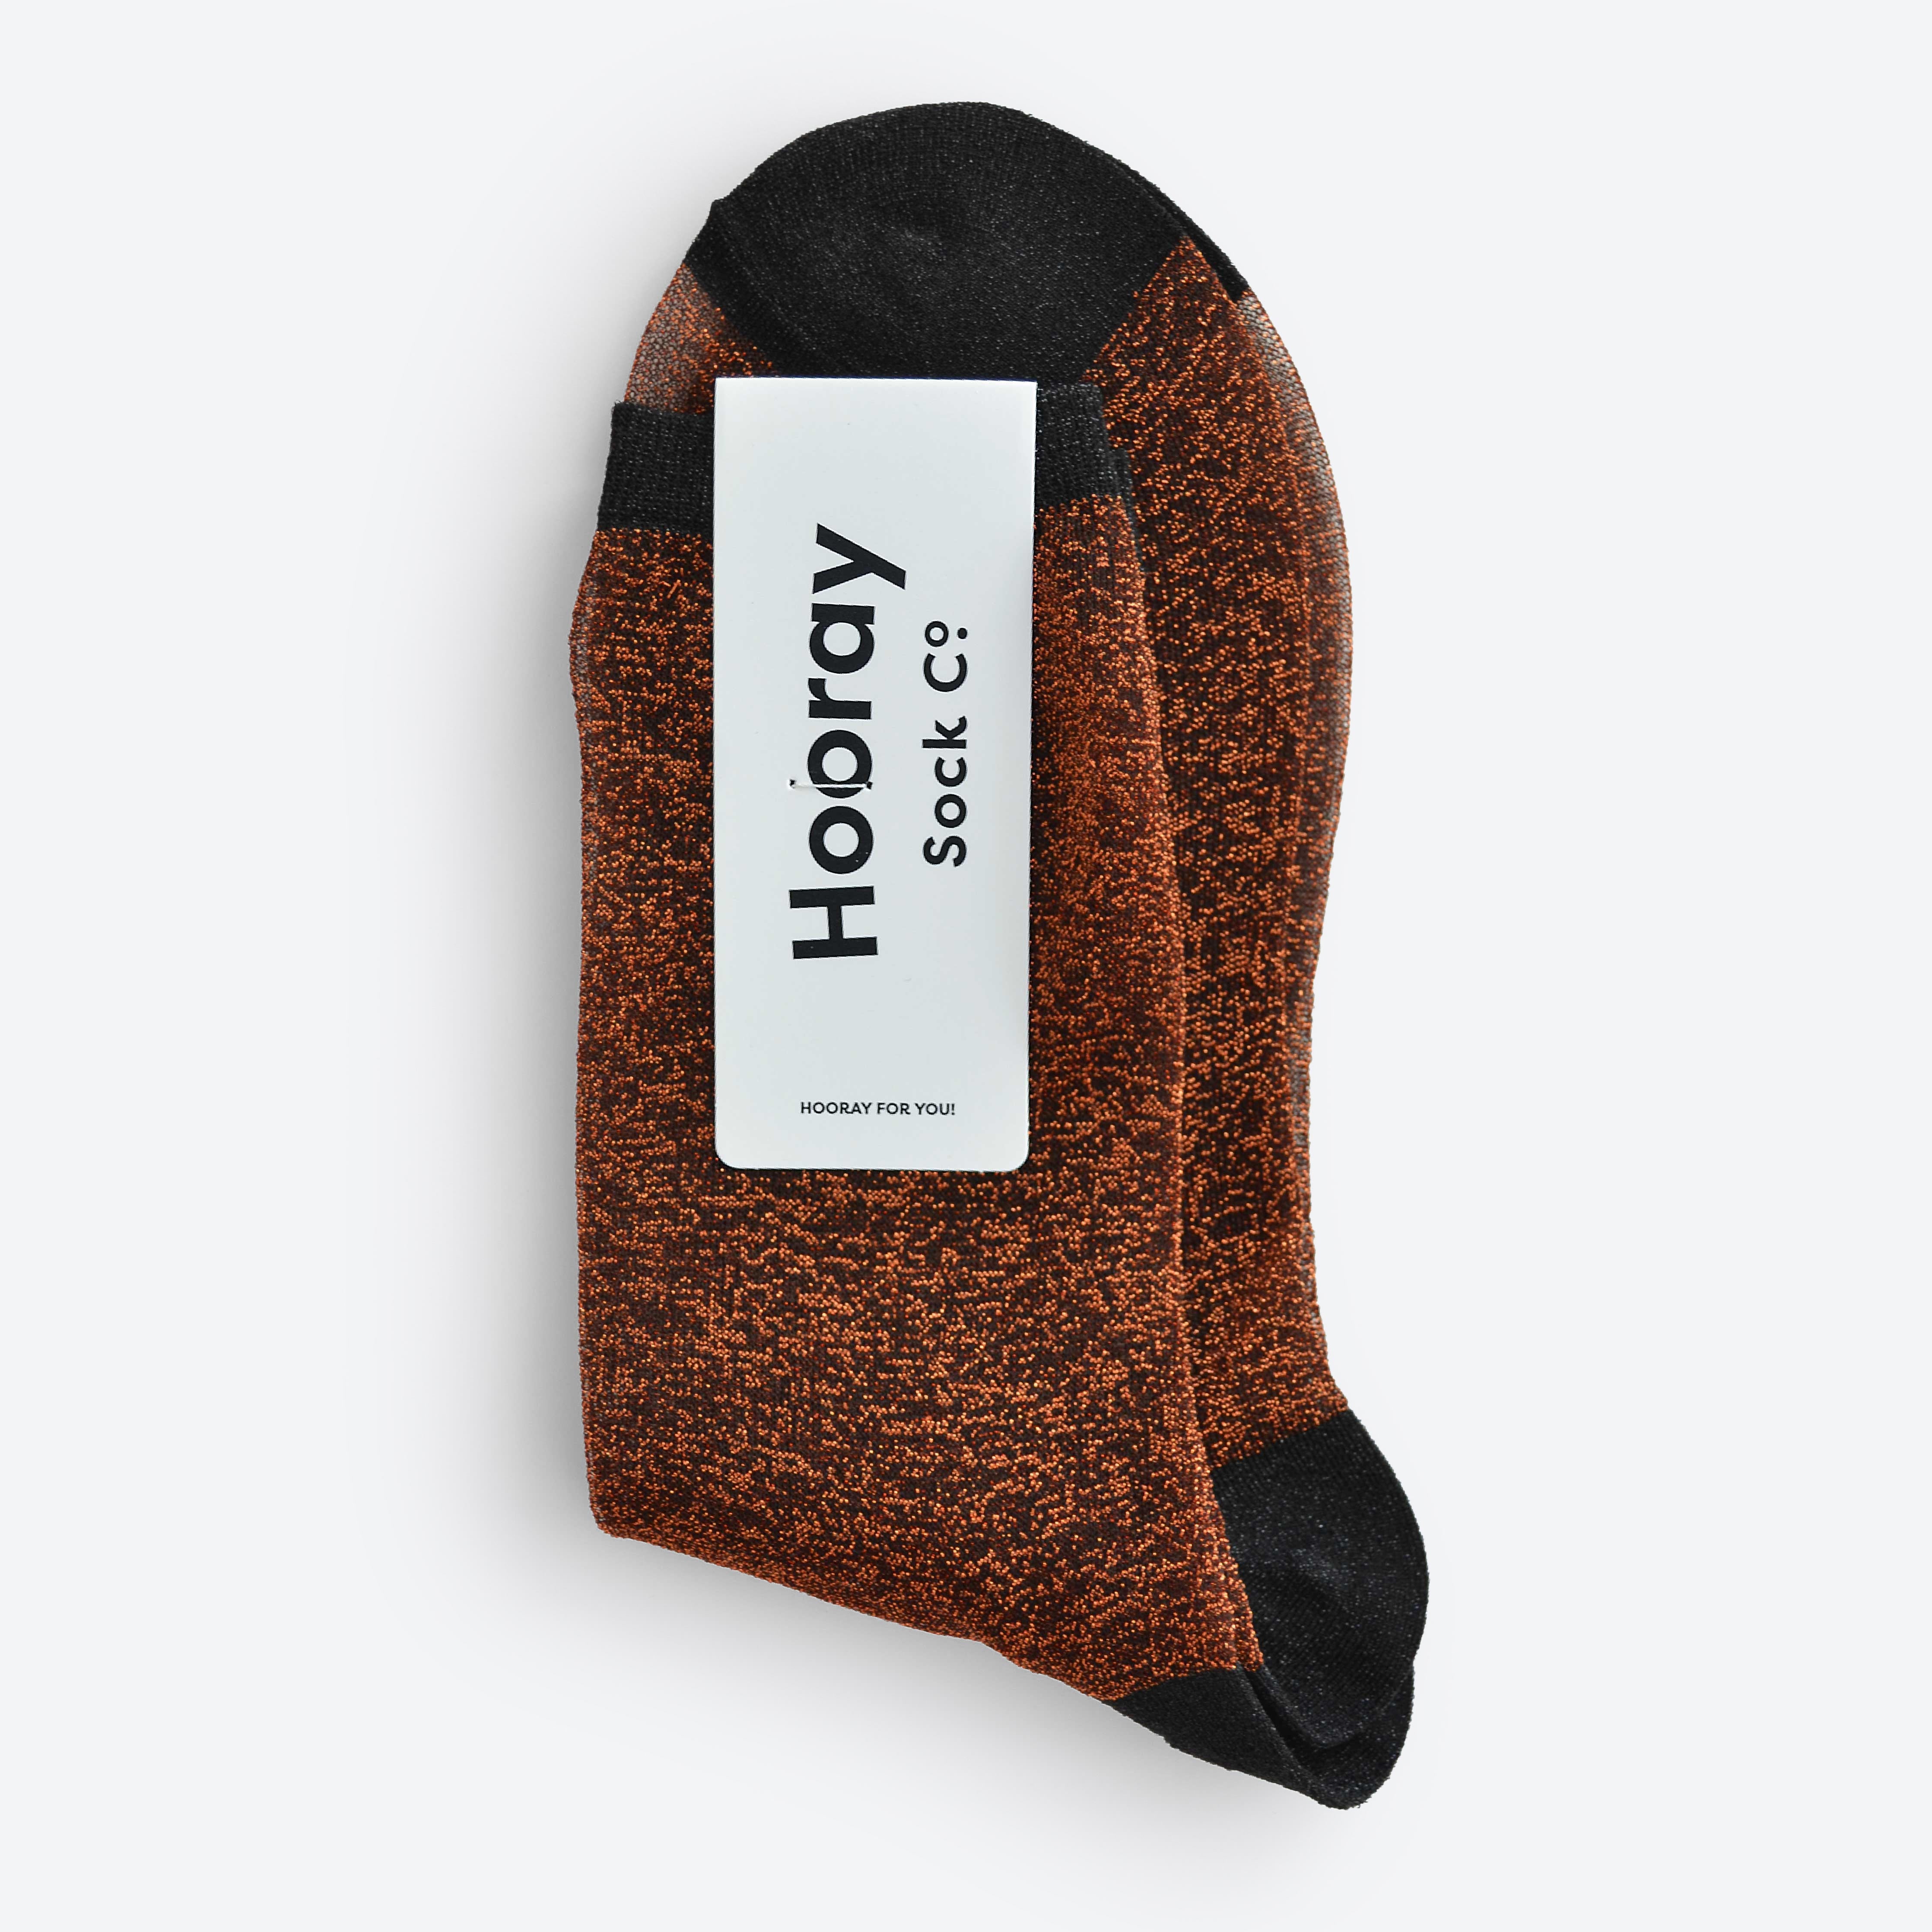 Elevate your style with Broadway socks in Black, Silver, Brick, or Blue. Short crew length with subtle metallic thread. Made in South Korea.